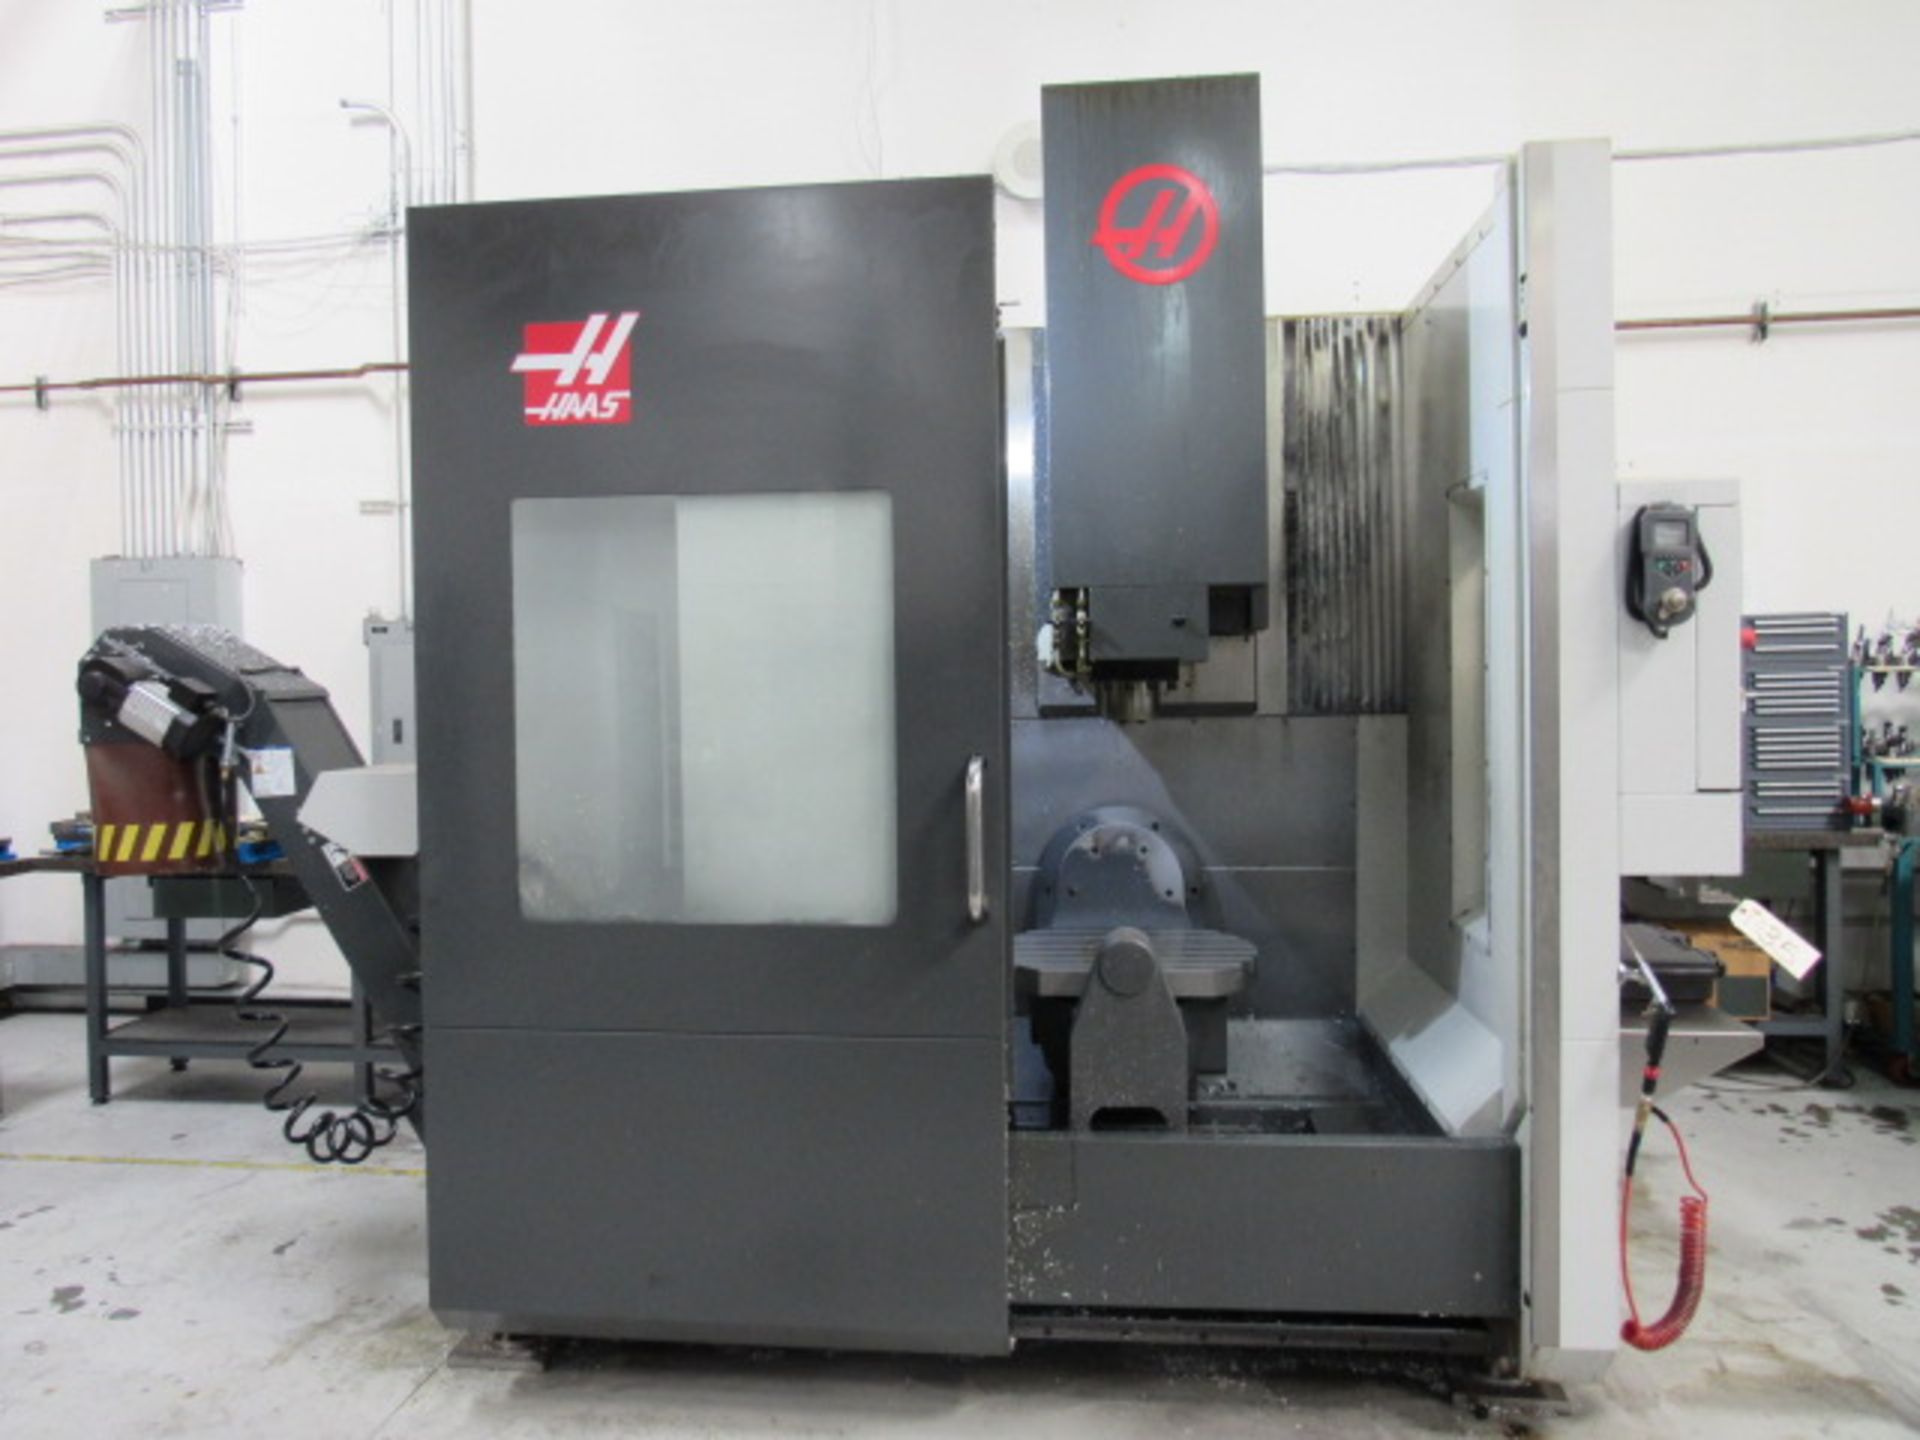 Haas UMC750 5-Axis CNC Vertical Machining Center - Image 2 of 12